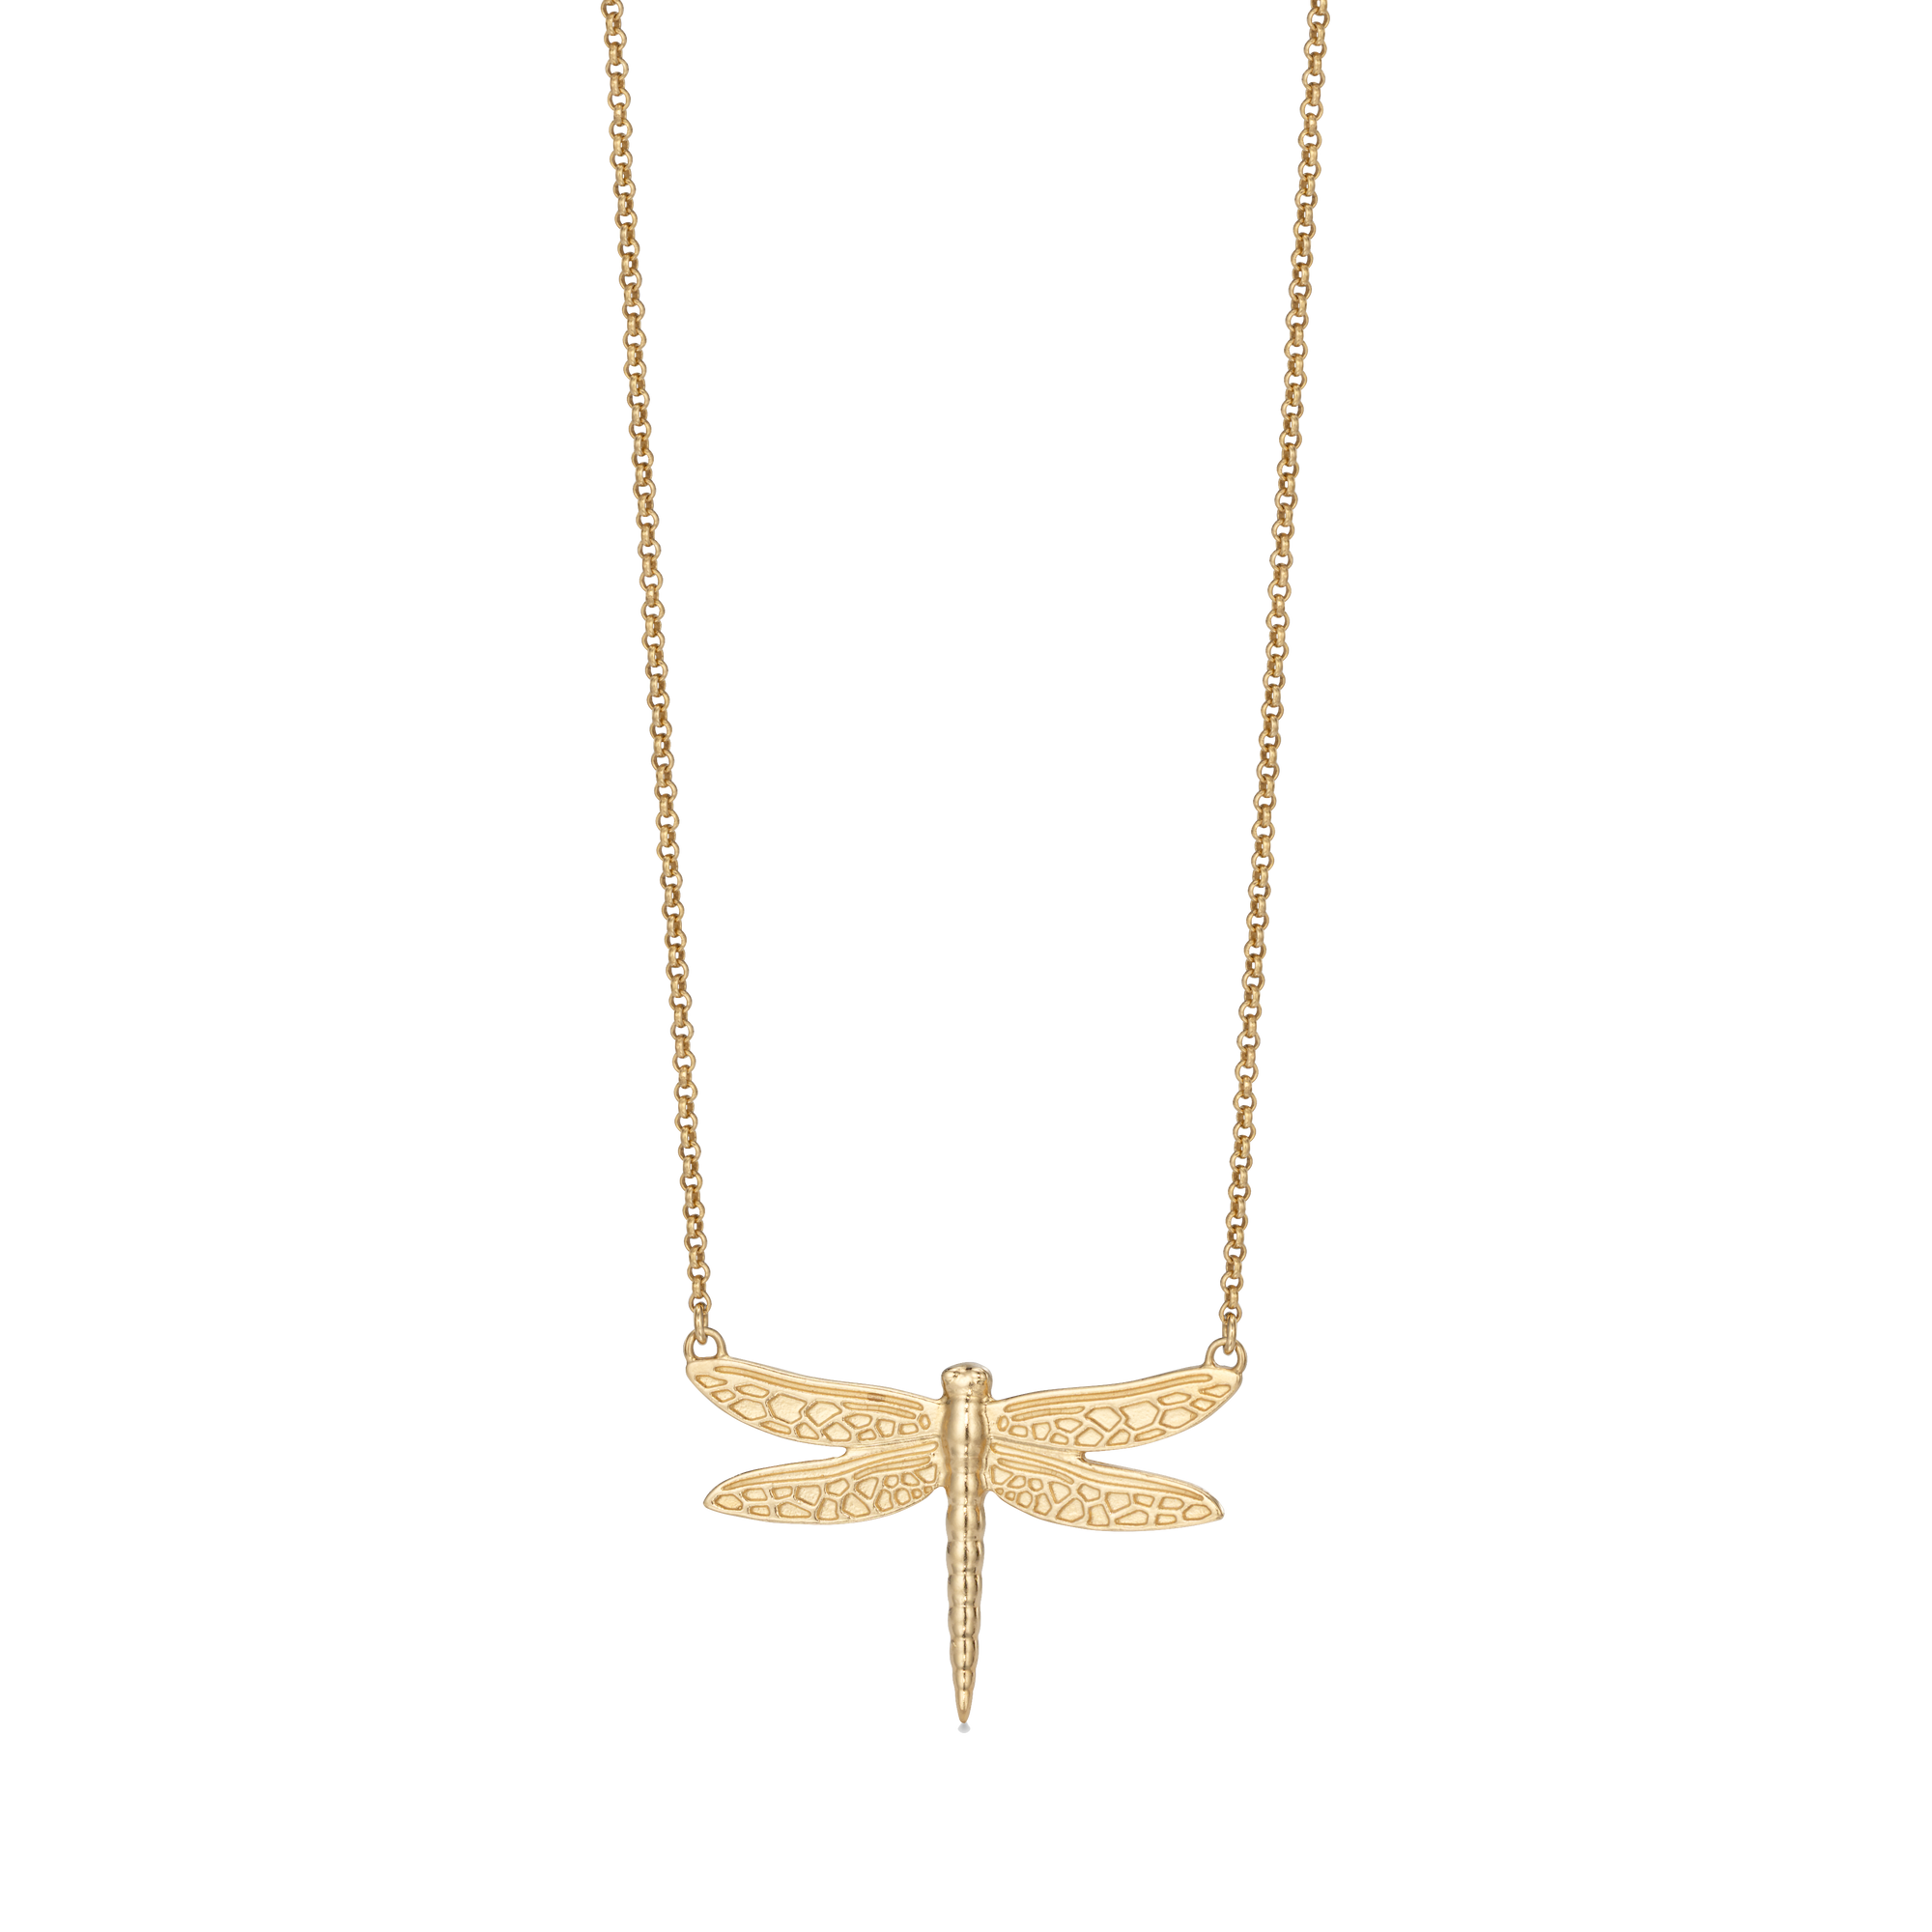 Dragonfly Necklace - Large